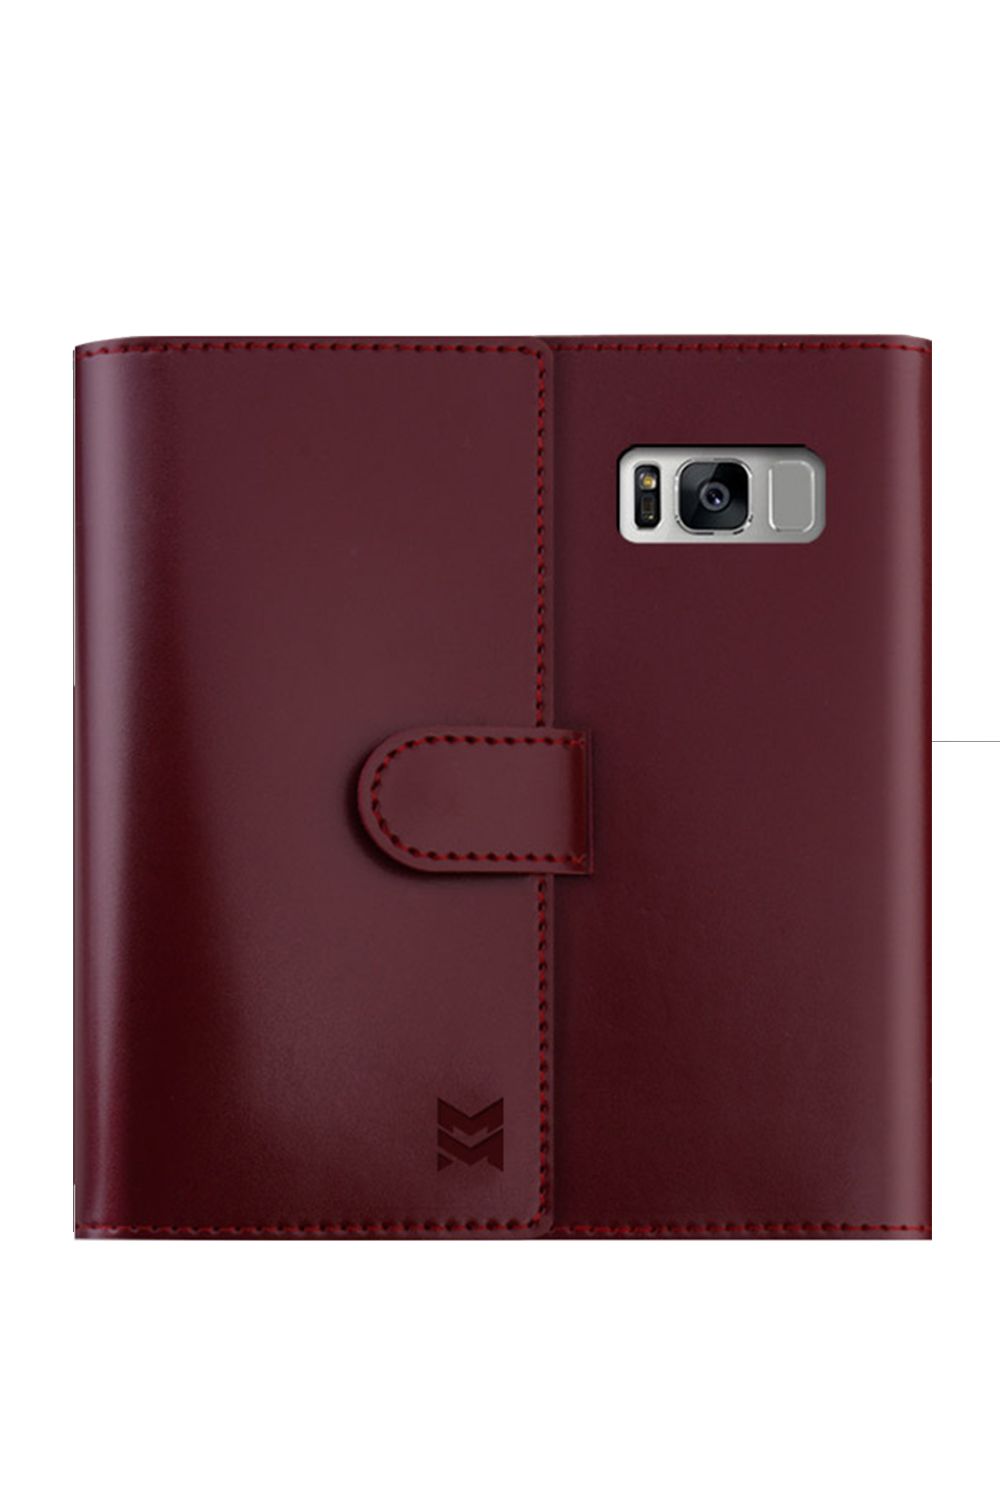 iPhone 11 Pro Maximo Vintage Edition Daily Wallet Case - Wine